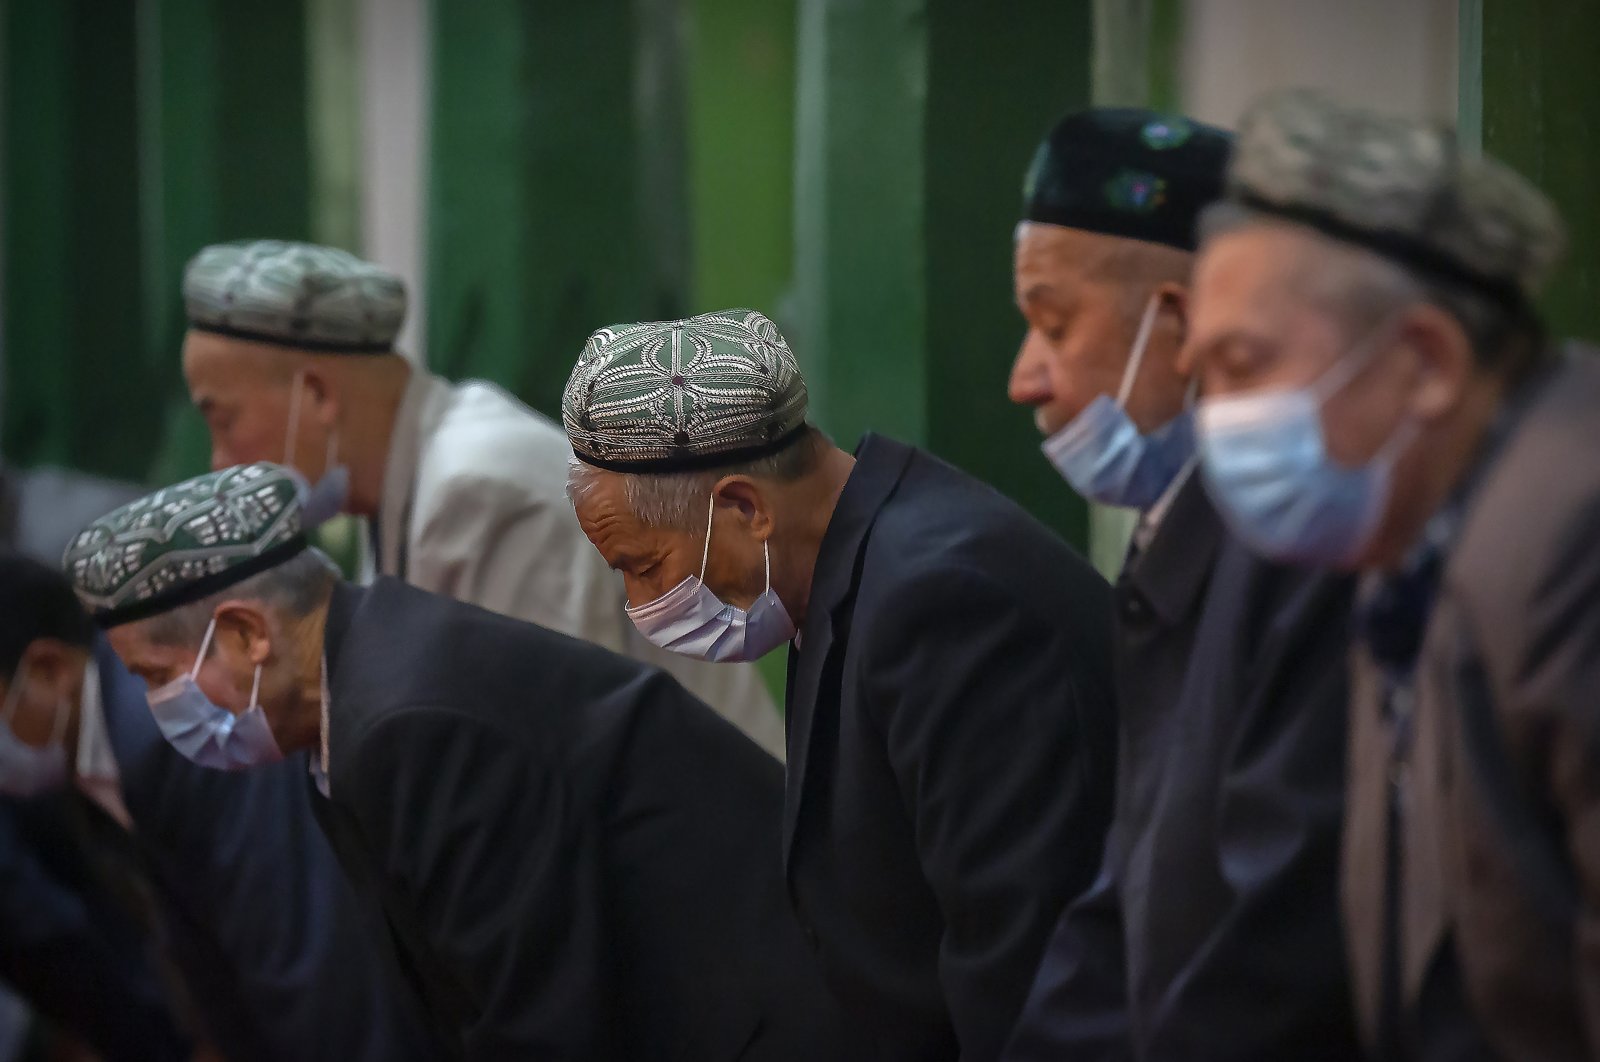 Uyghurs and other members of the faithful pray during services at the Id Kah Mosque in Kashgar in western China&#039;s Xinjiang Uyghur Autonomous Region, as seen during a government-organized visit for foreign journalists, April 19, 2021. (AP File Photo)